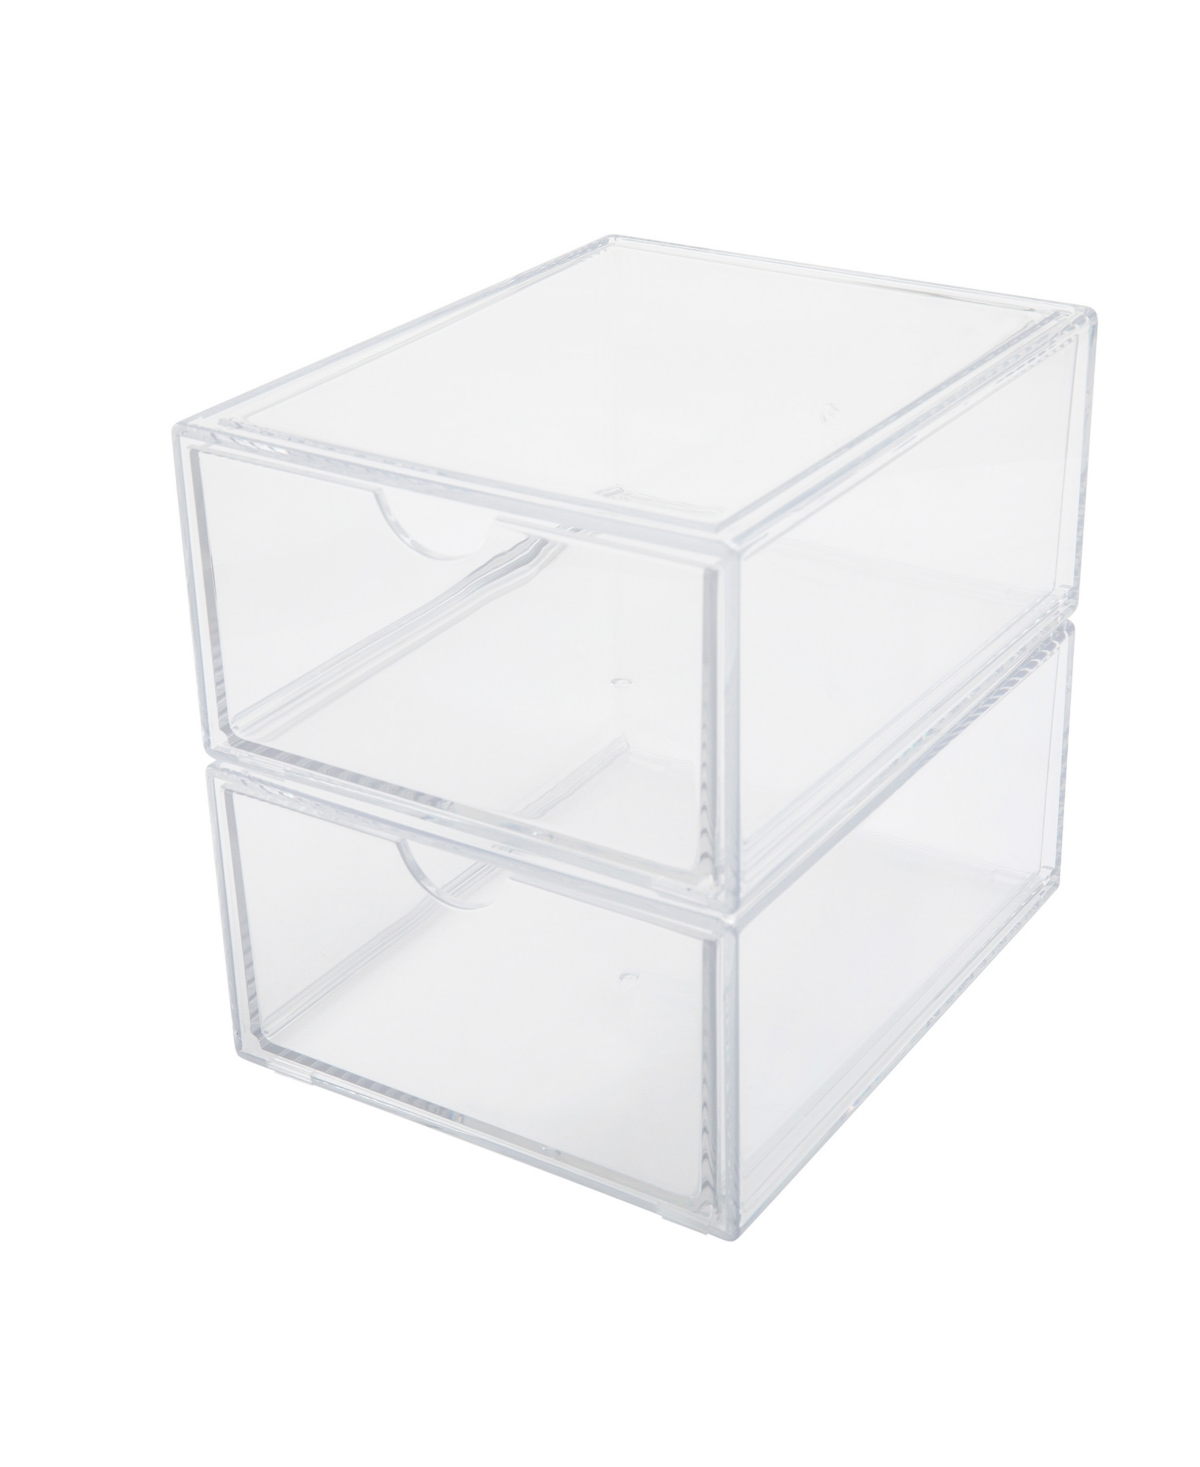 Brody 2 Pack Plastic Stackable Office Desktop Organizer Boxes with Drawer, 6" x 7.5" - Clear